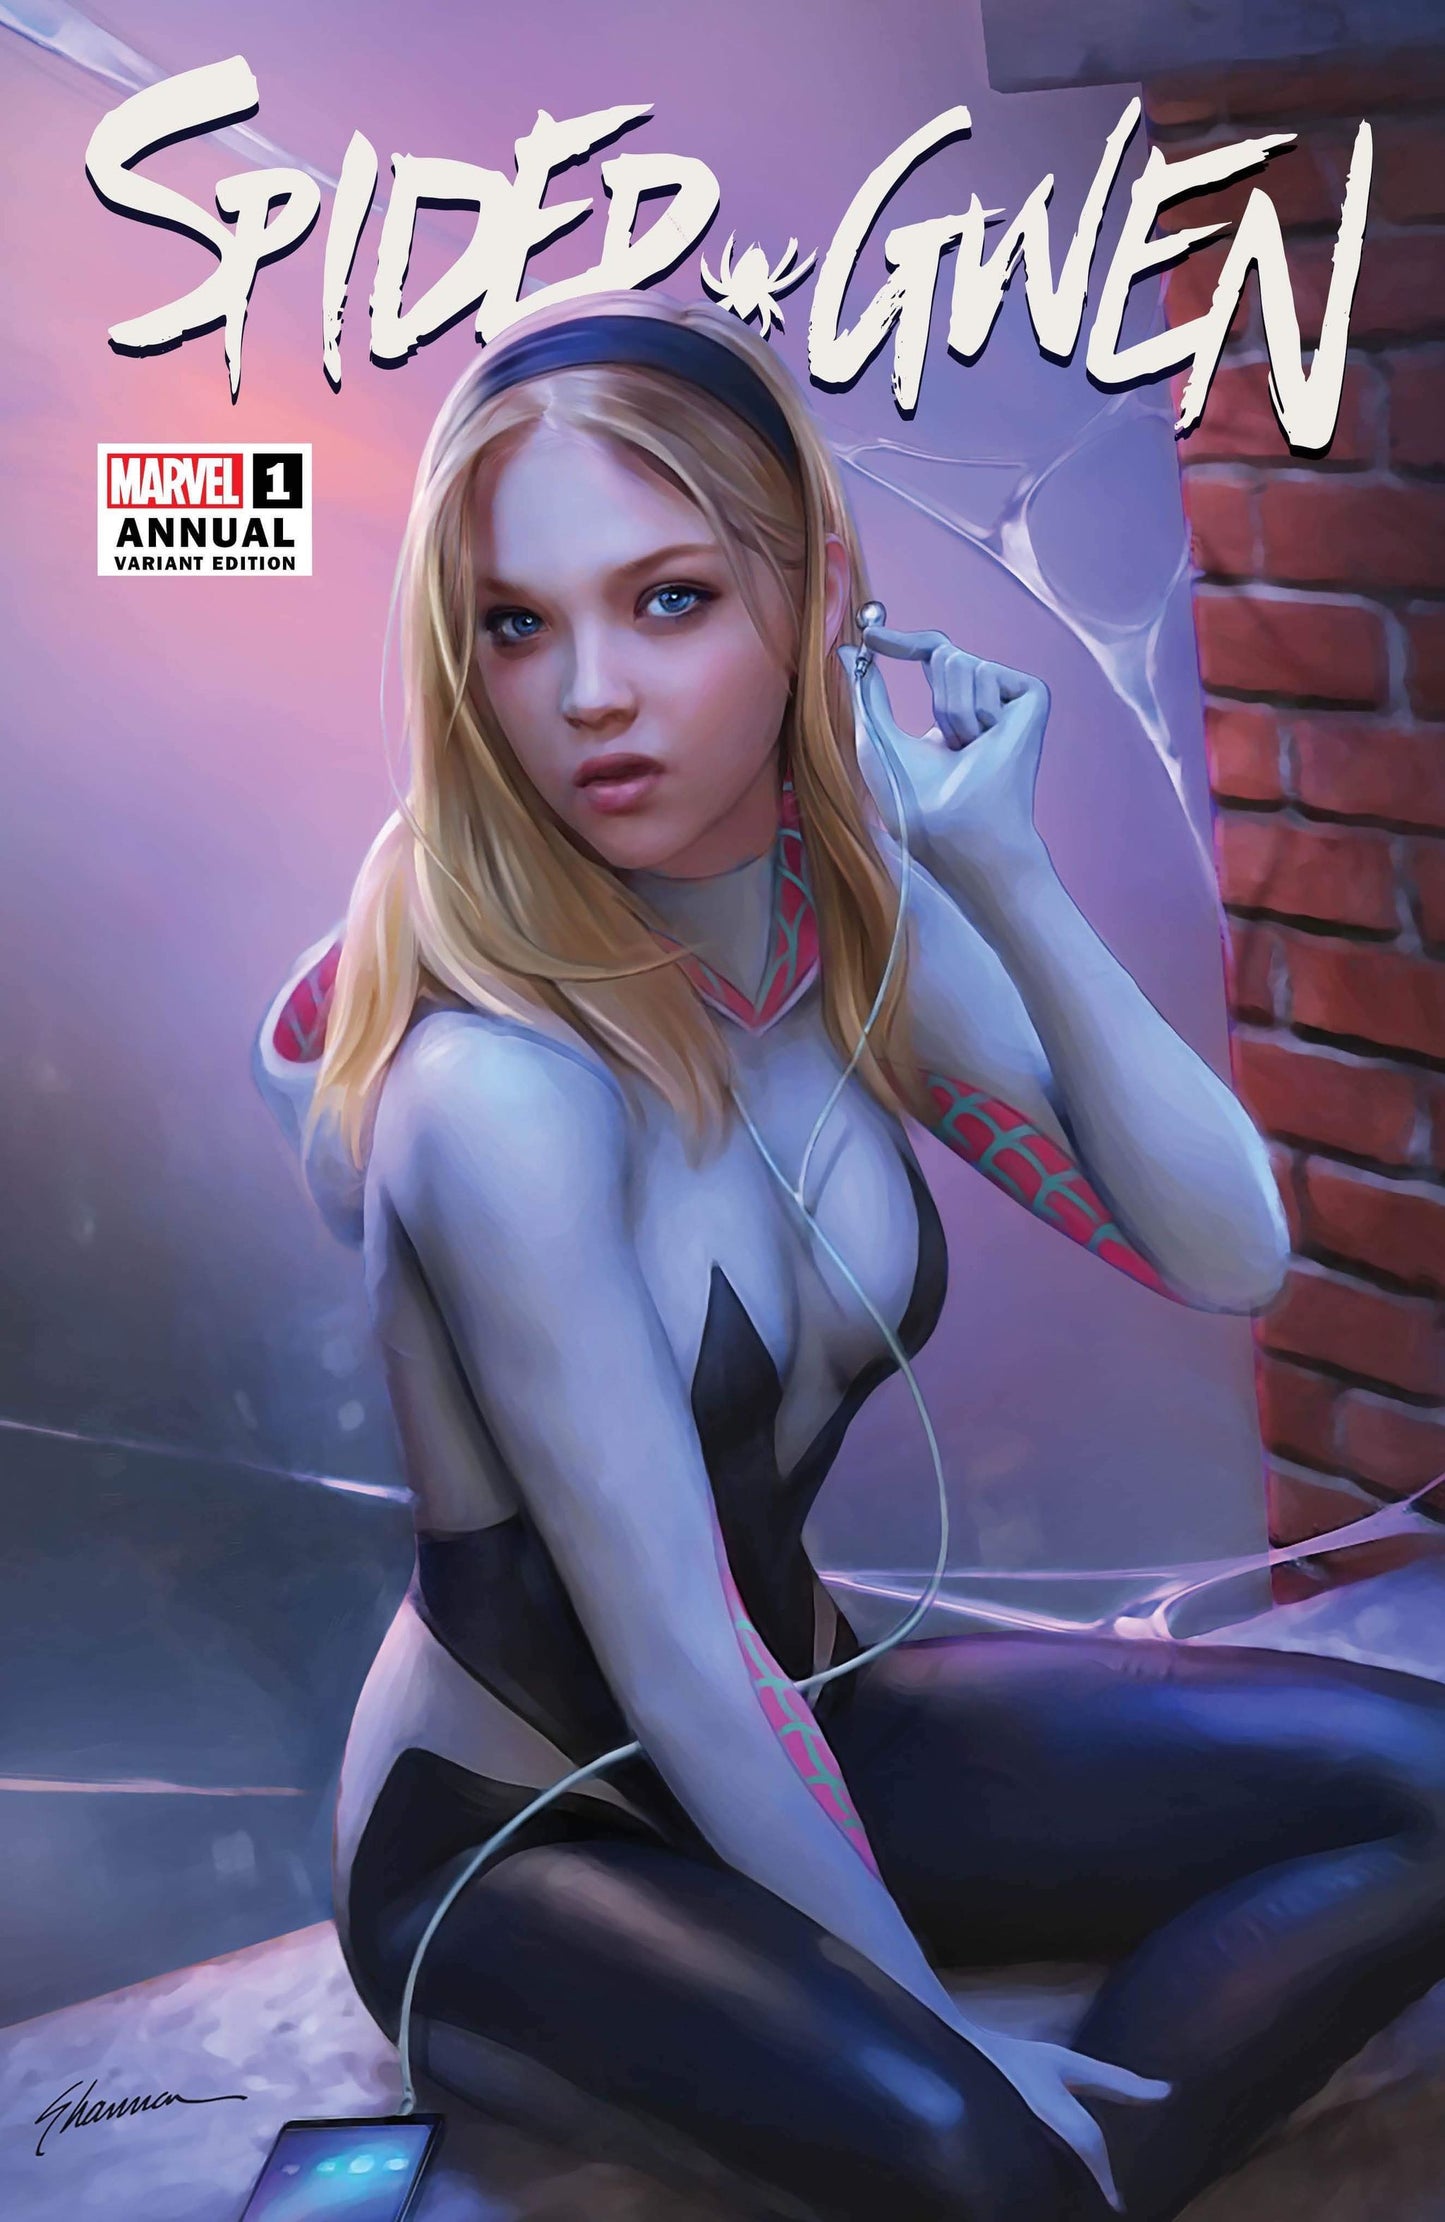 SPIDER-GWEN ANNUAL #1 SHANNON MAER TRADE DRESS VARIANT LIMITED TO 3000 COPIES